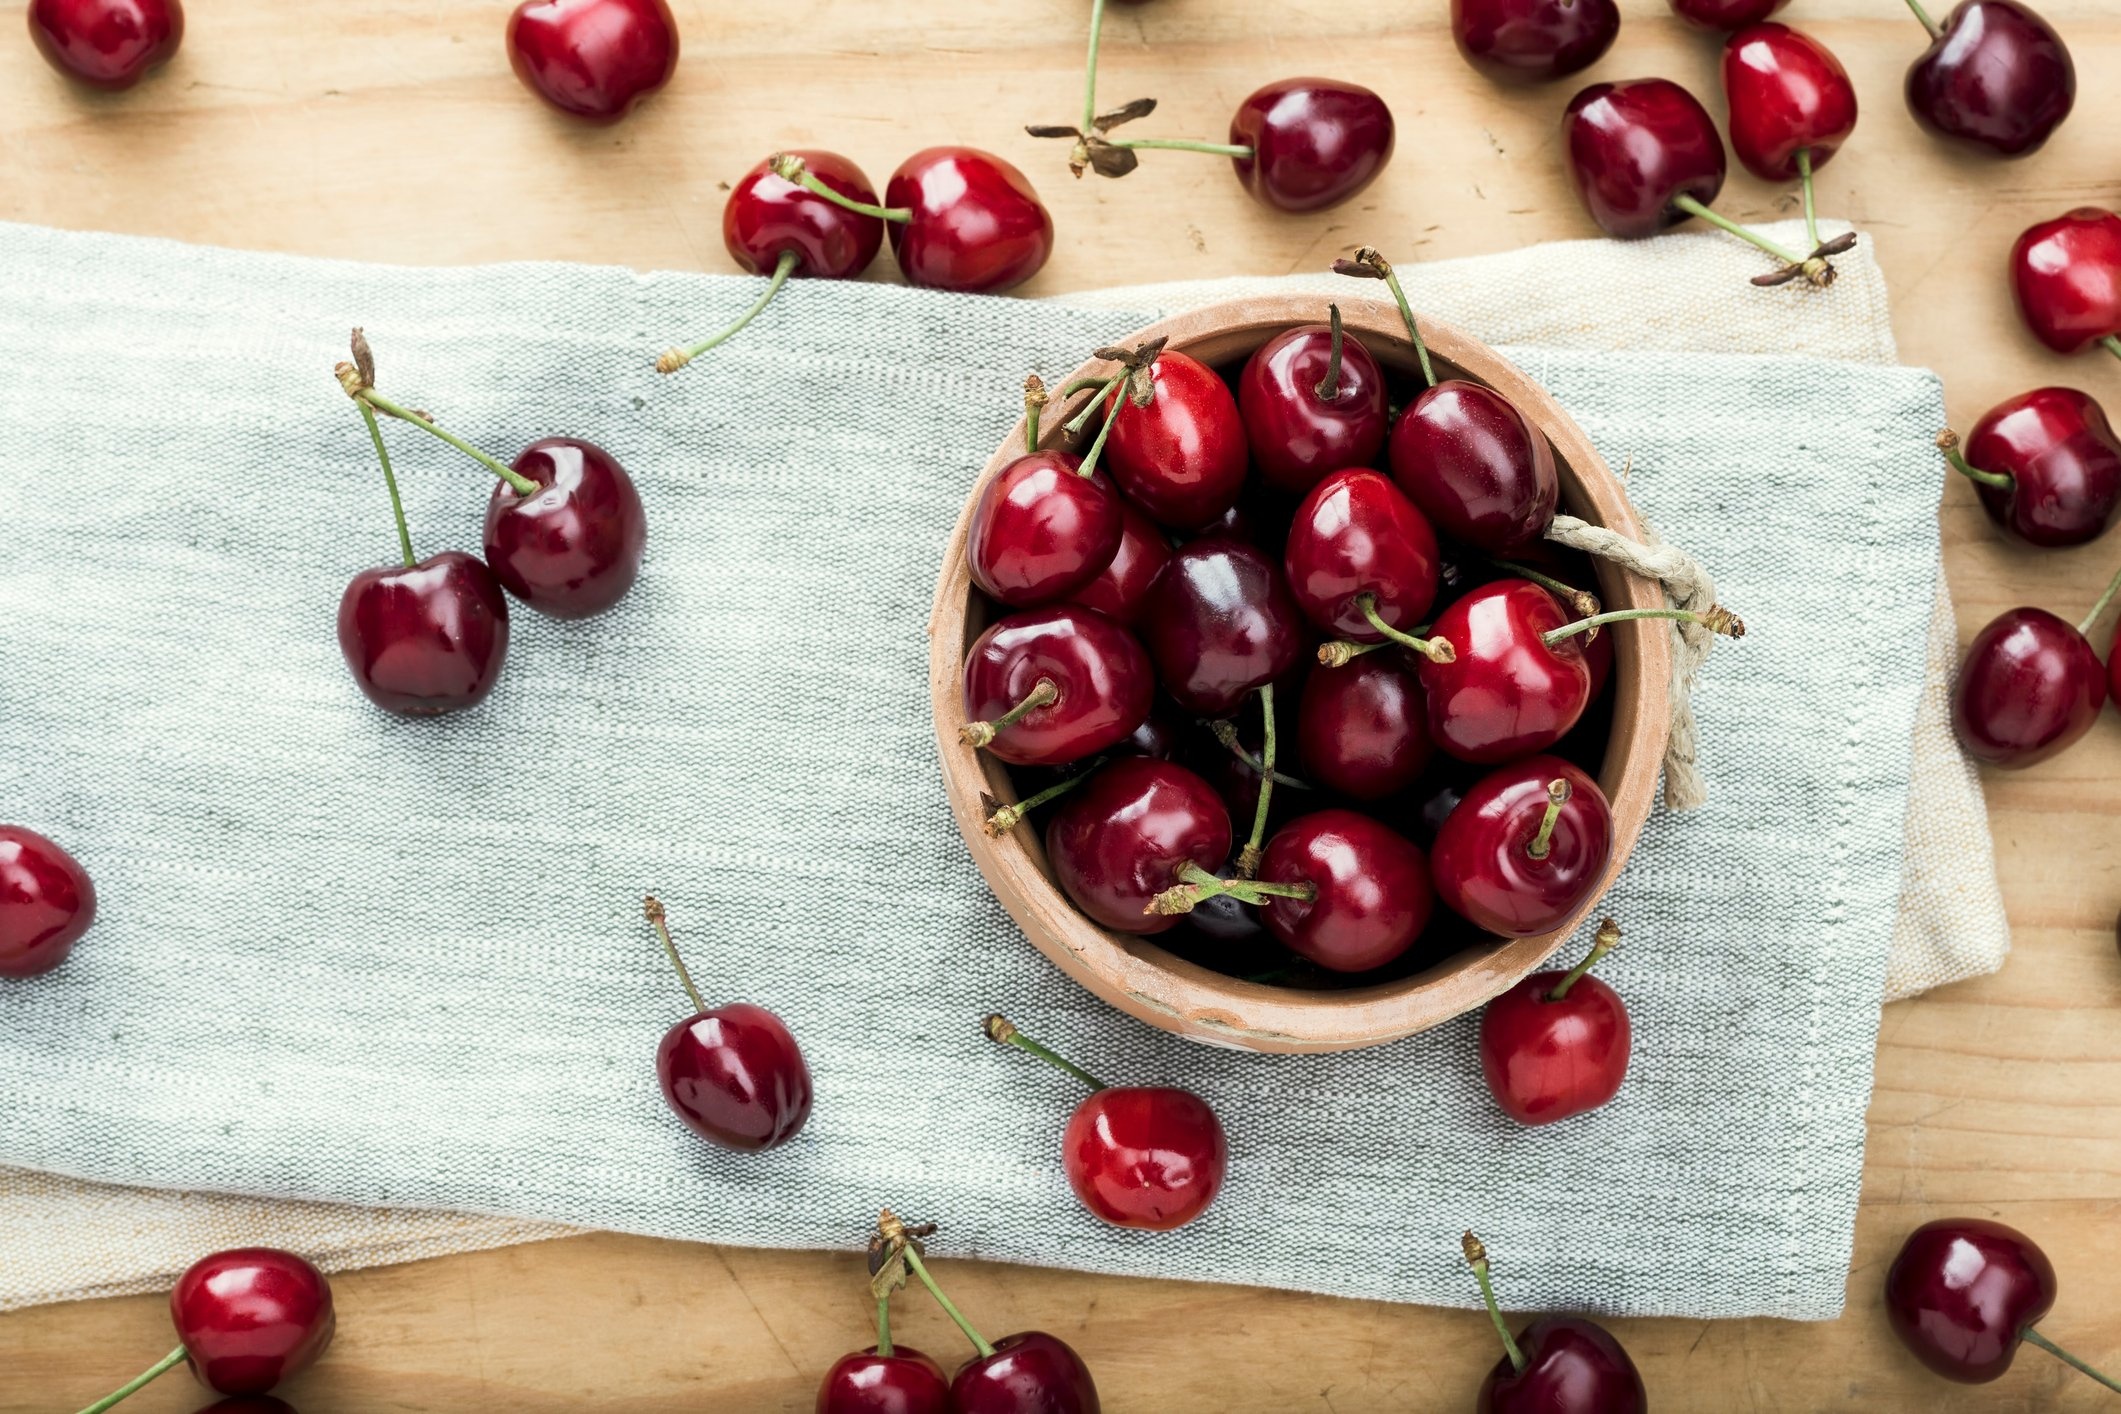 Cherry: Have a sweet, mildly tart flavor well suited for both savory and sweet preparations. 2130x1420 HD Wallpaper.